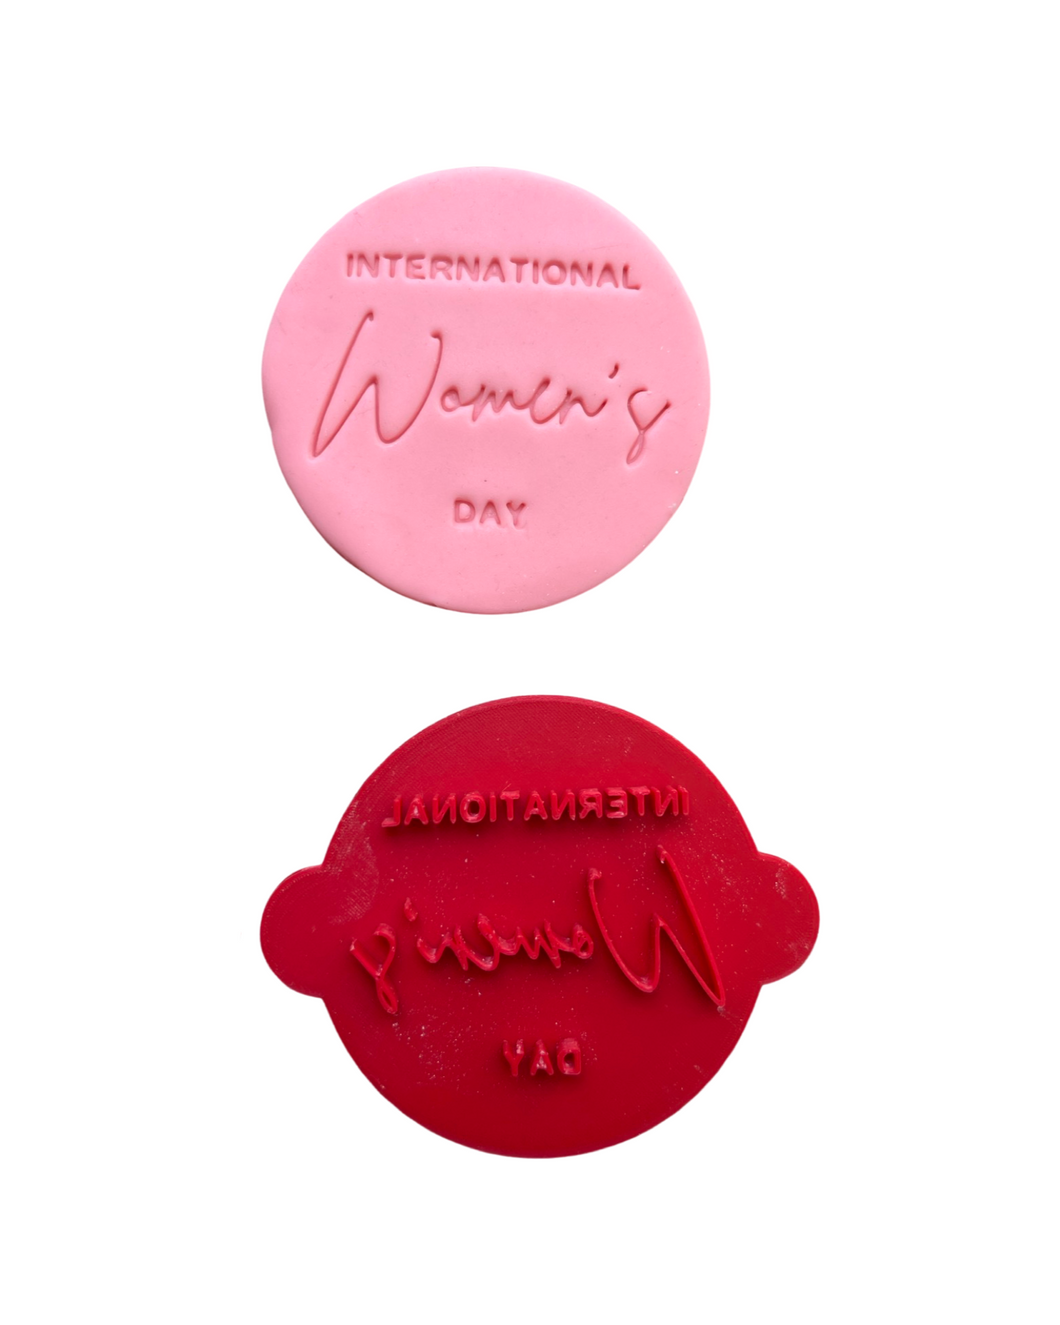 International women's day inspire Inclusion cookie stamp